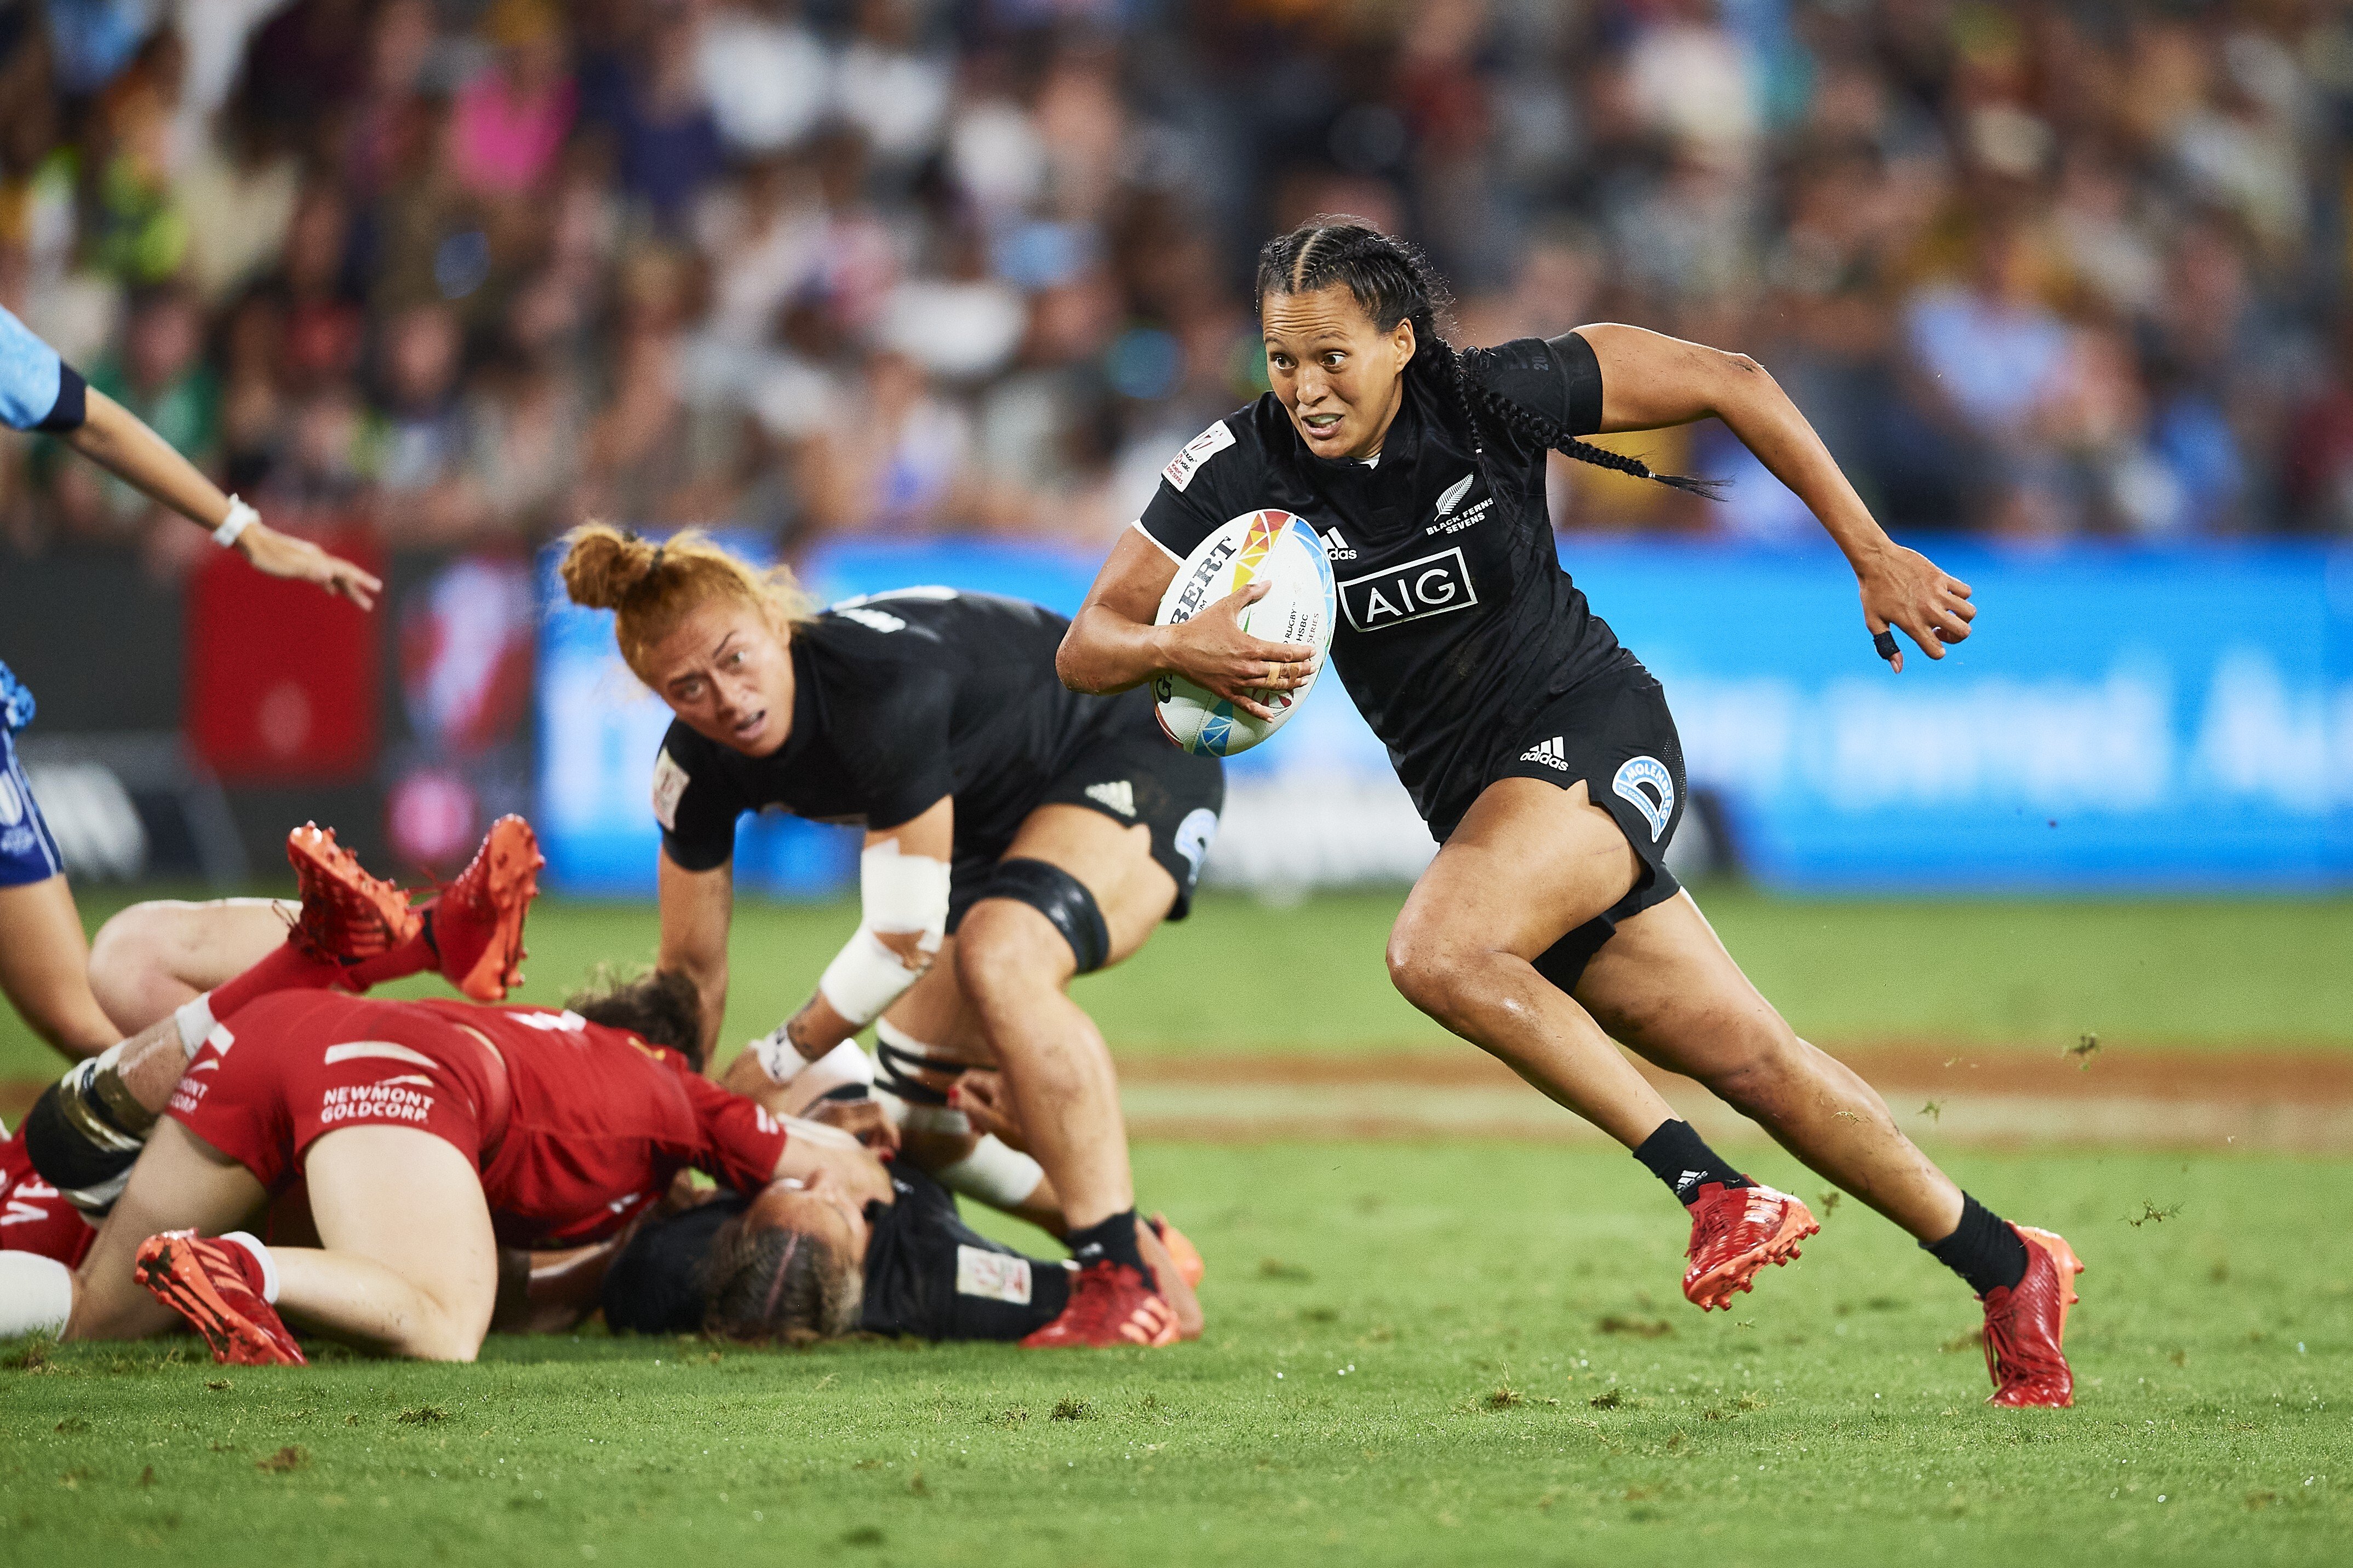 New Zealand’s record-breaking rugby sevens player Tyla Nathan-Wong secures another try at a 2019/20 season World Sevens Series game. Photo: Getty Images